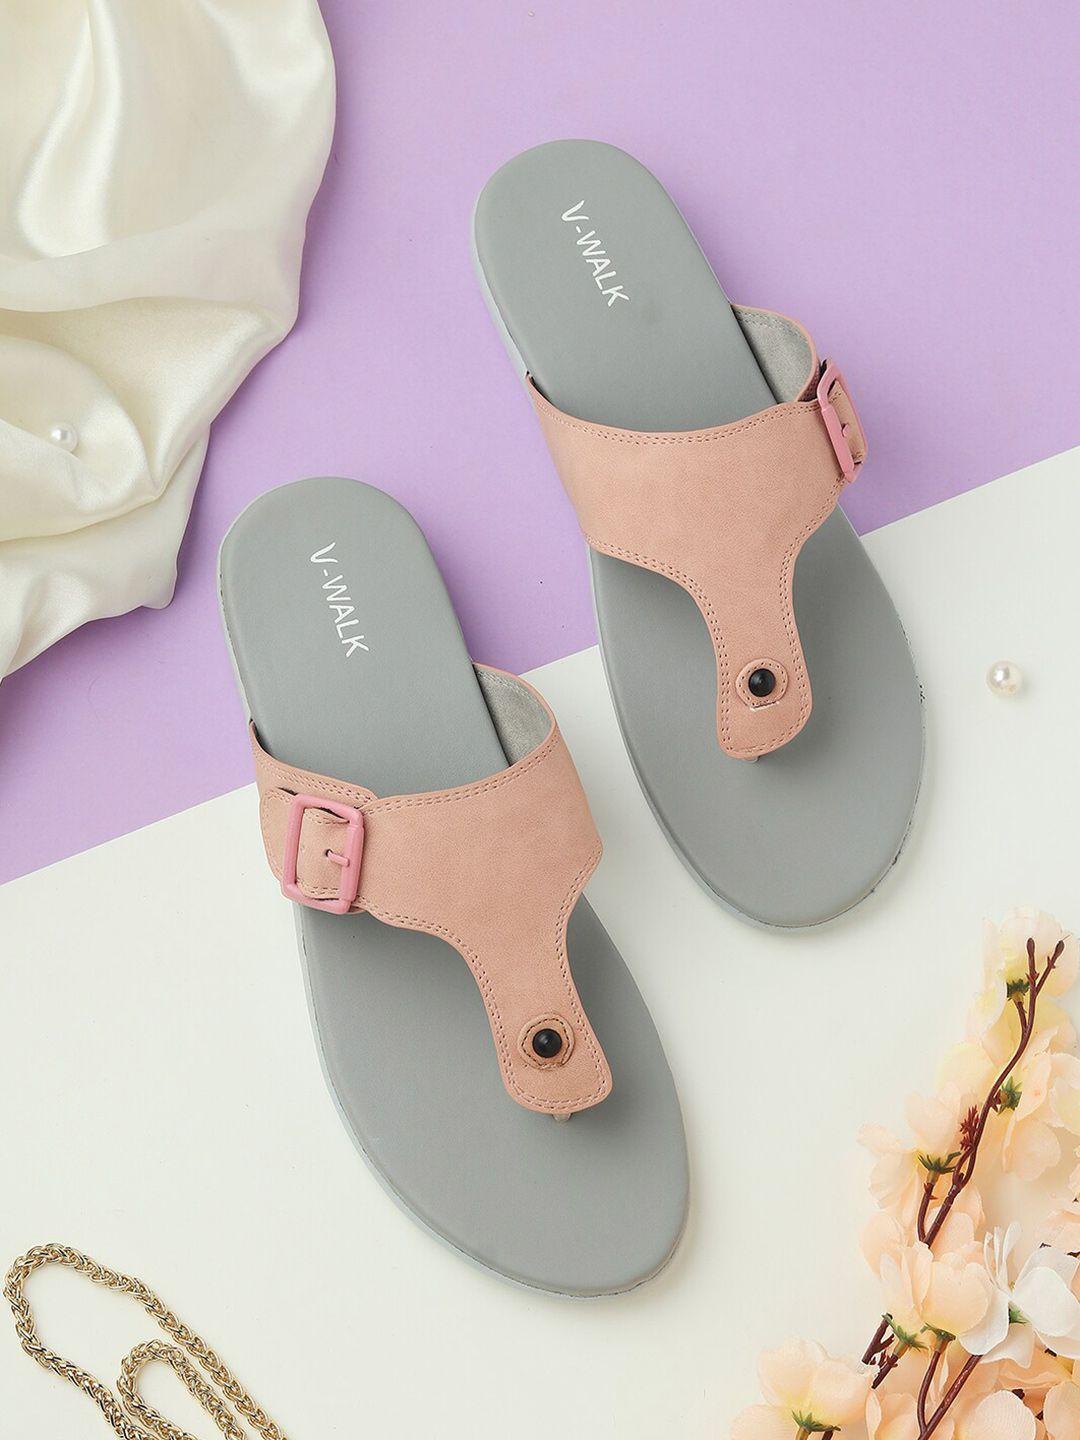 v-walk t-strap flats with buckle detail